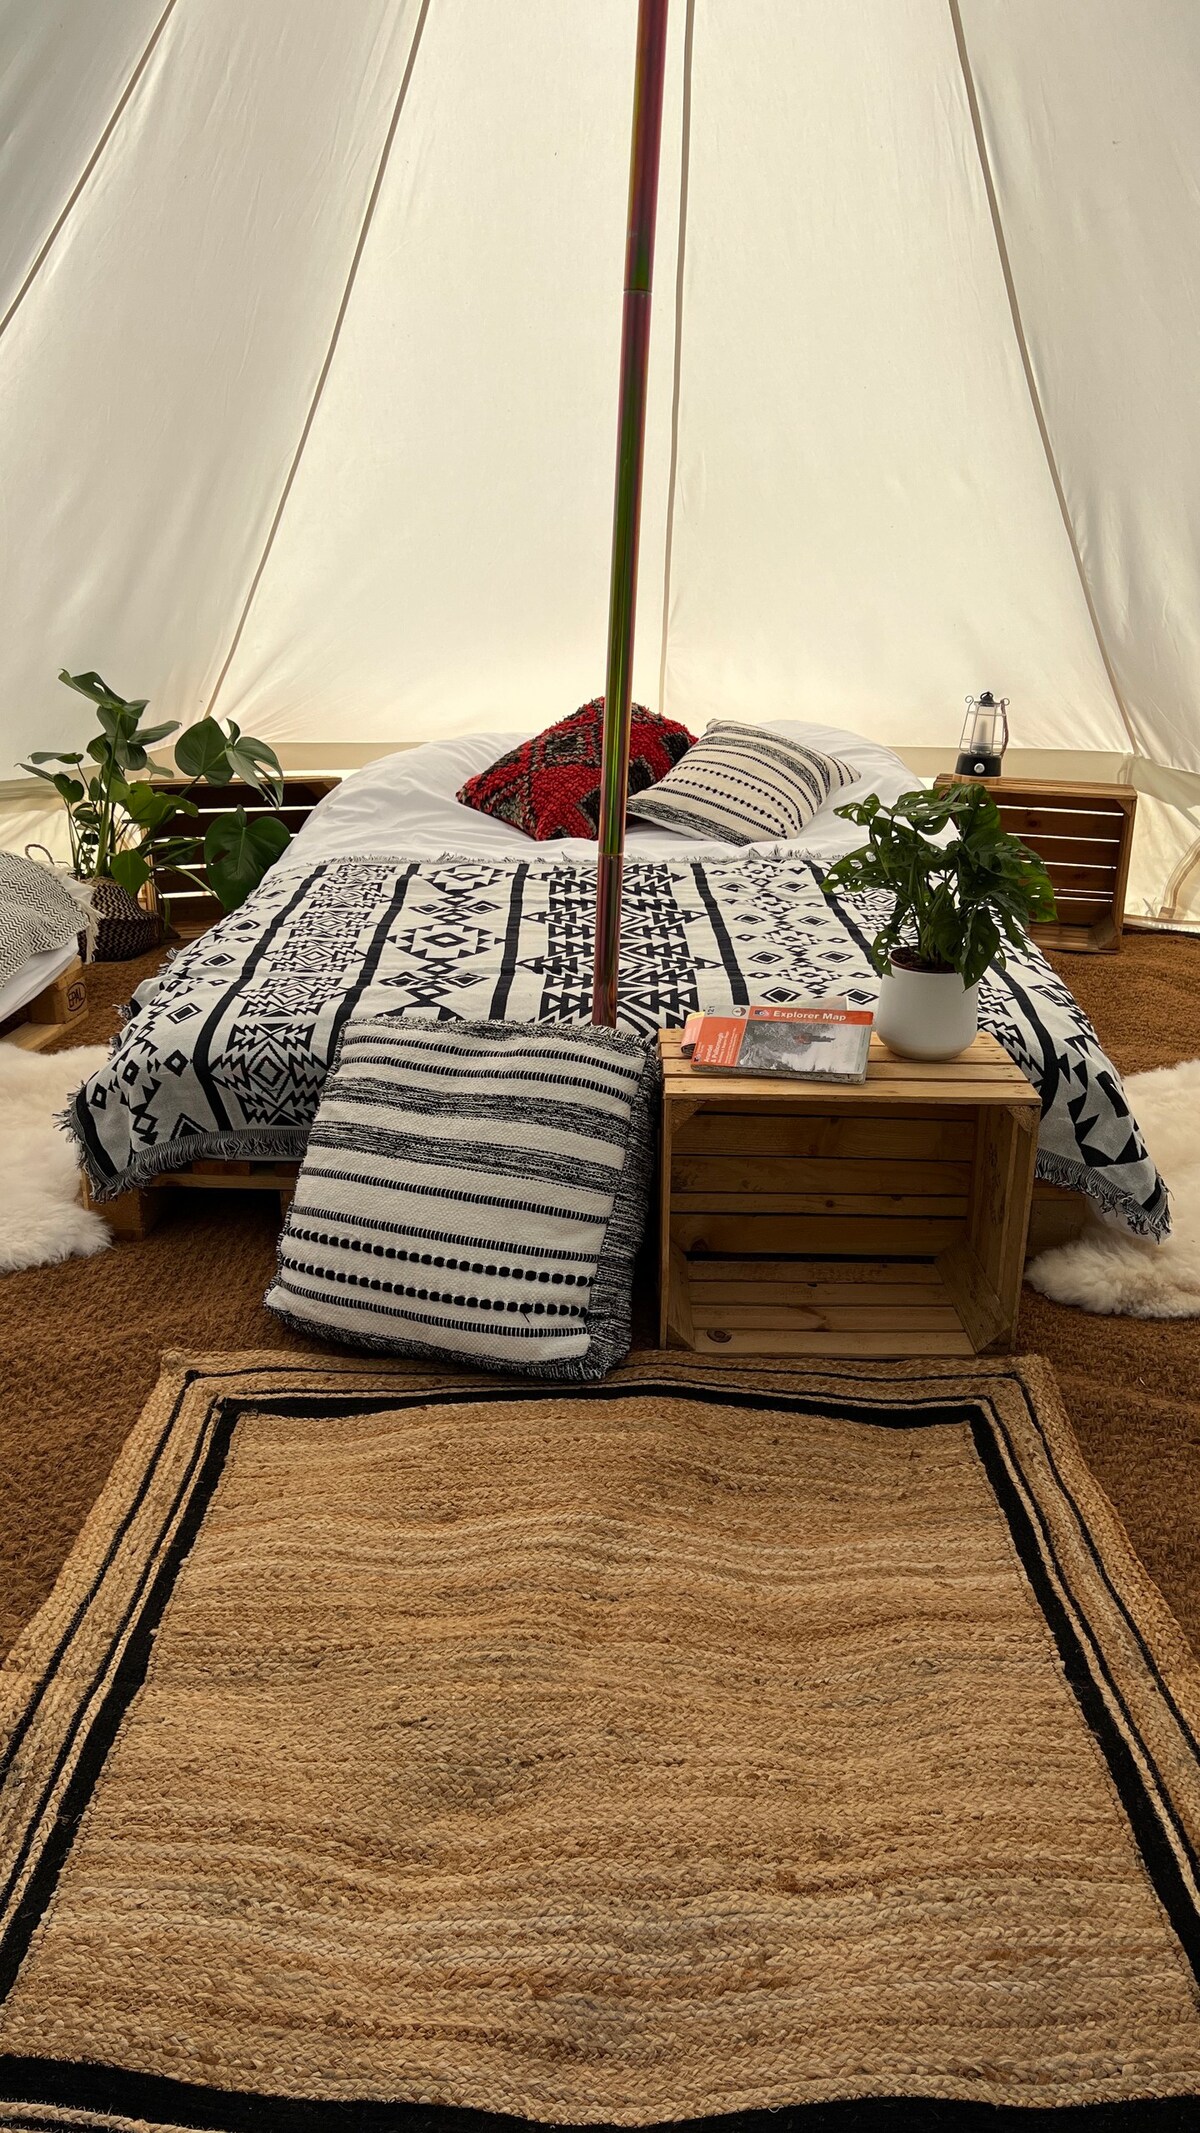 Gorgeous bell tent in beautifully tranquil setting